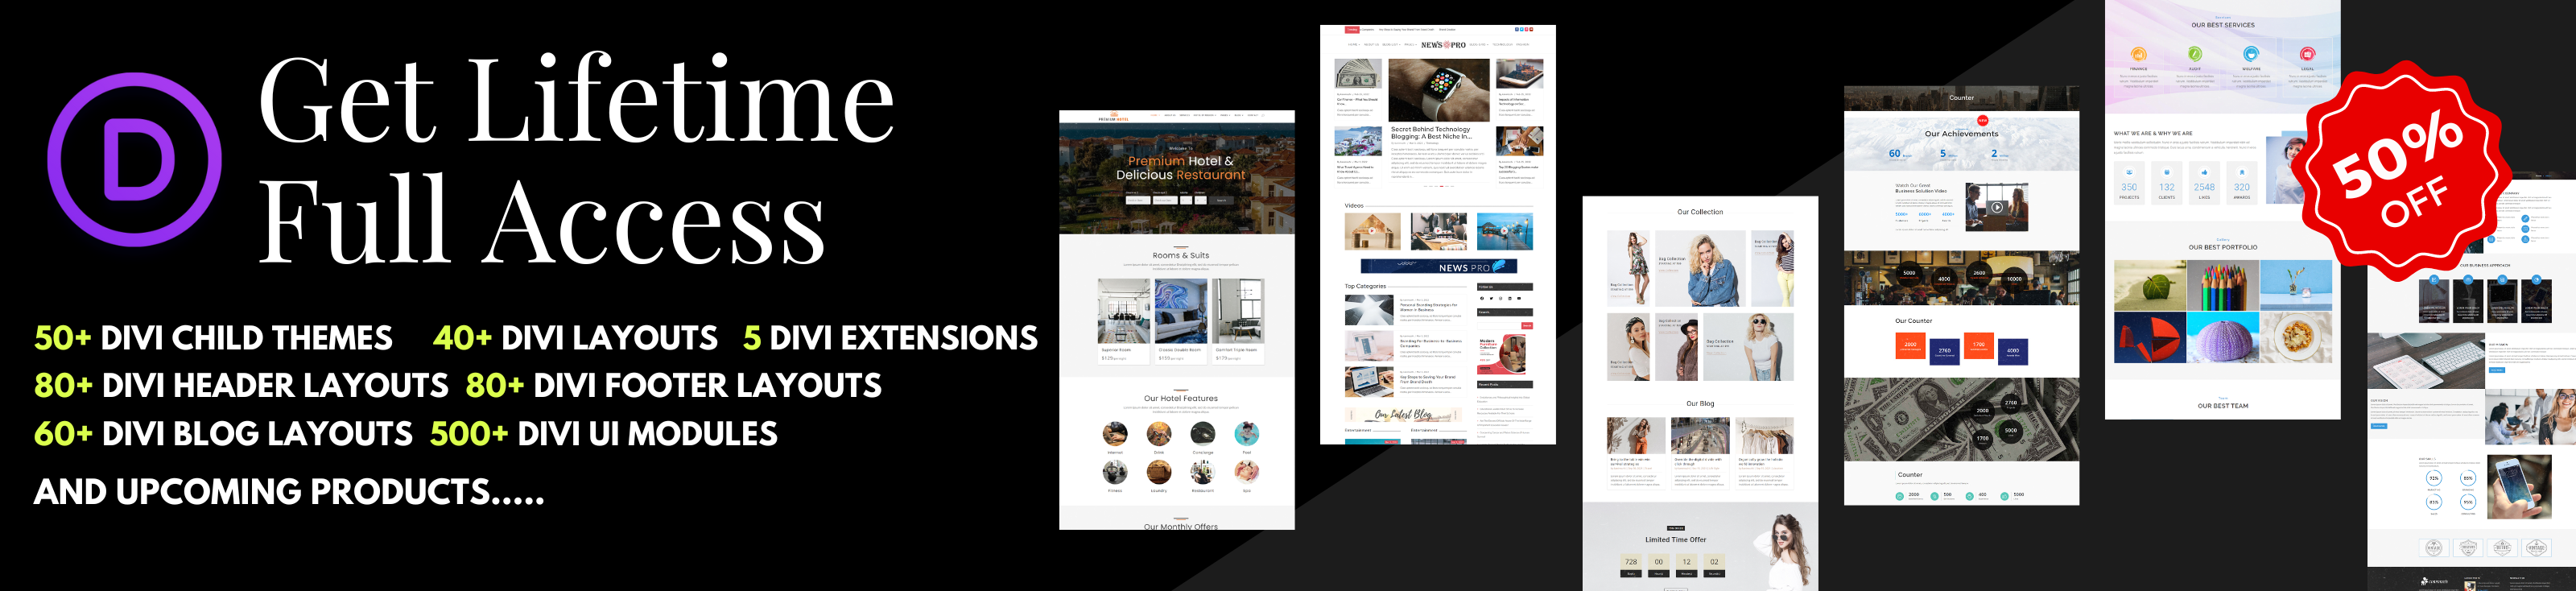 Course Guidance - Responsive Email Template